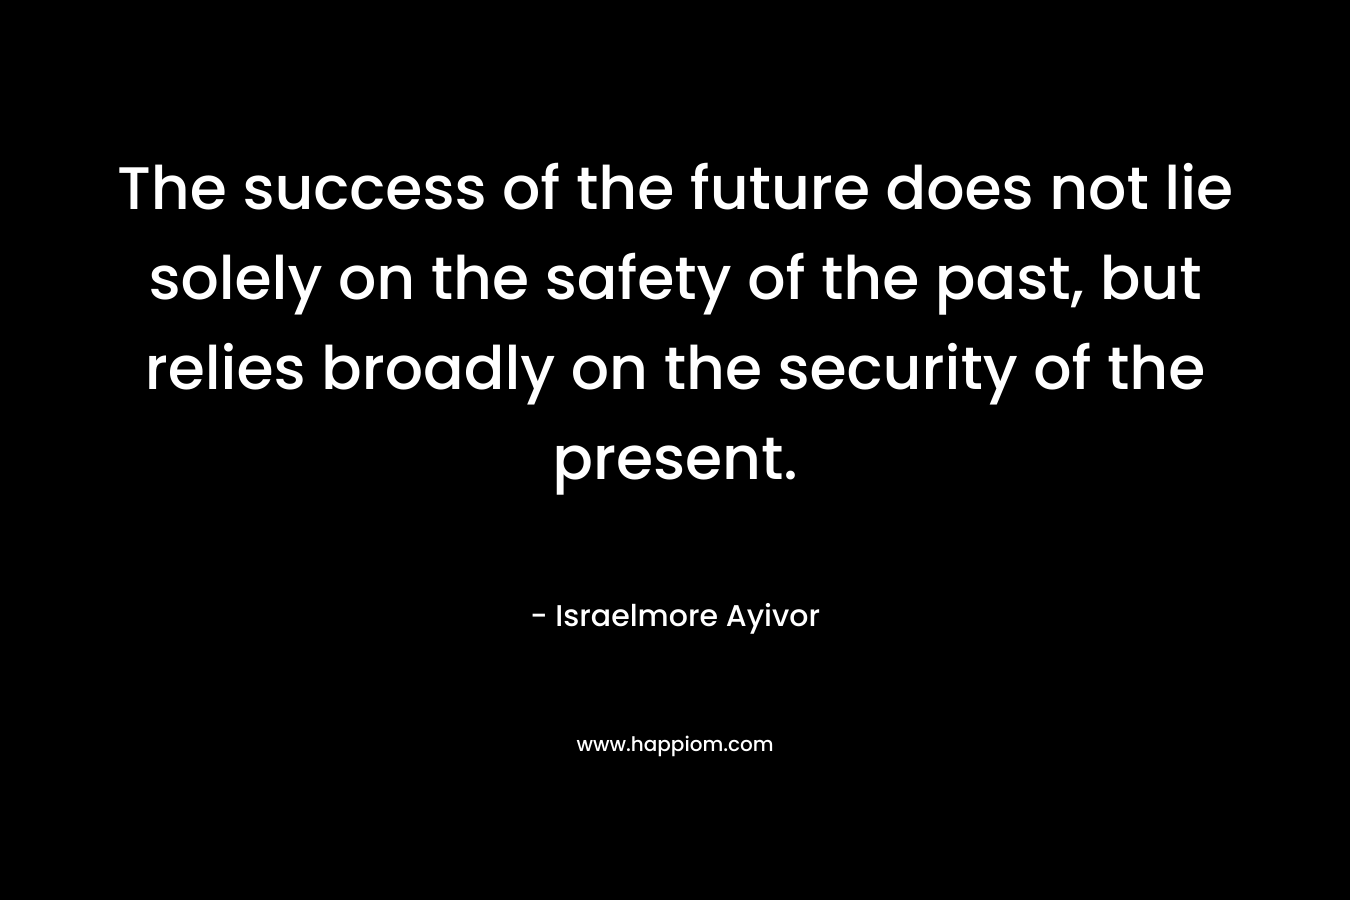 The success of the future does not lie solely on the safety of the past, but relies broadly on the security of the present. – Israelmore Ayivor